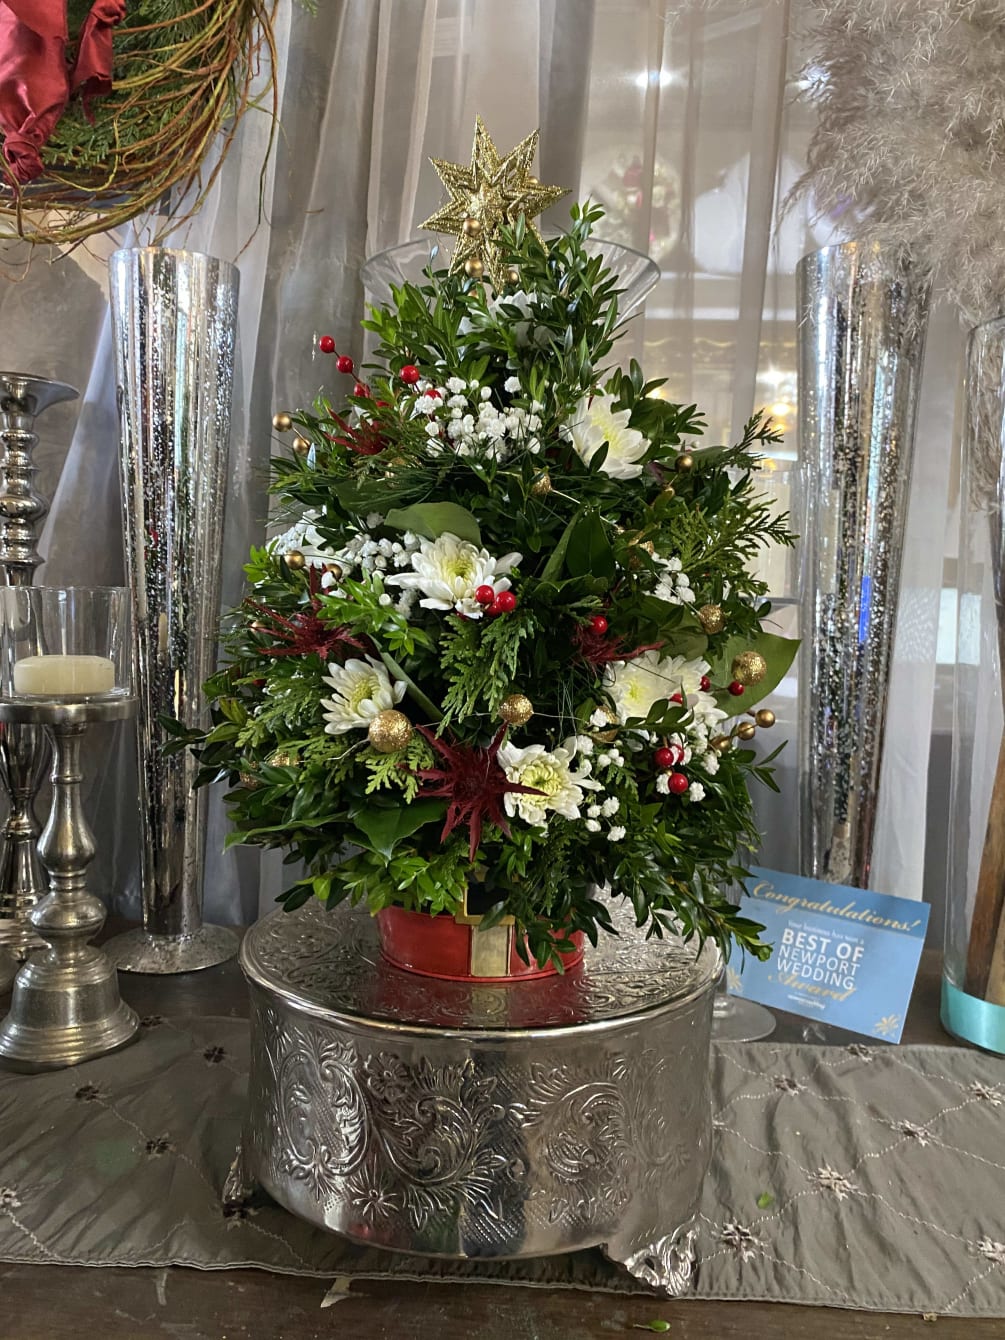 This medium-sized boxwood features white and red flowers with gold accents and